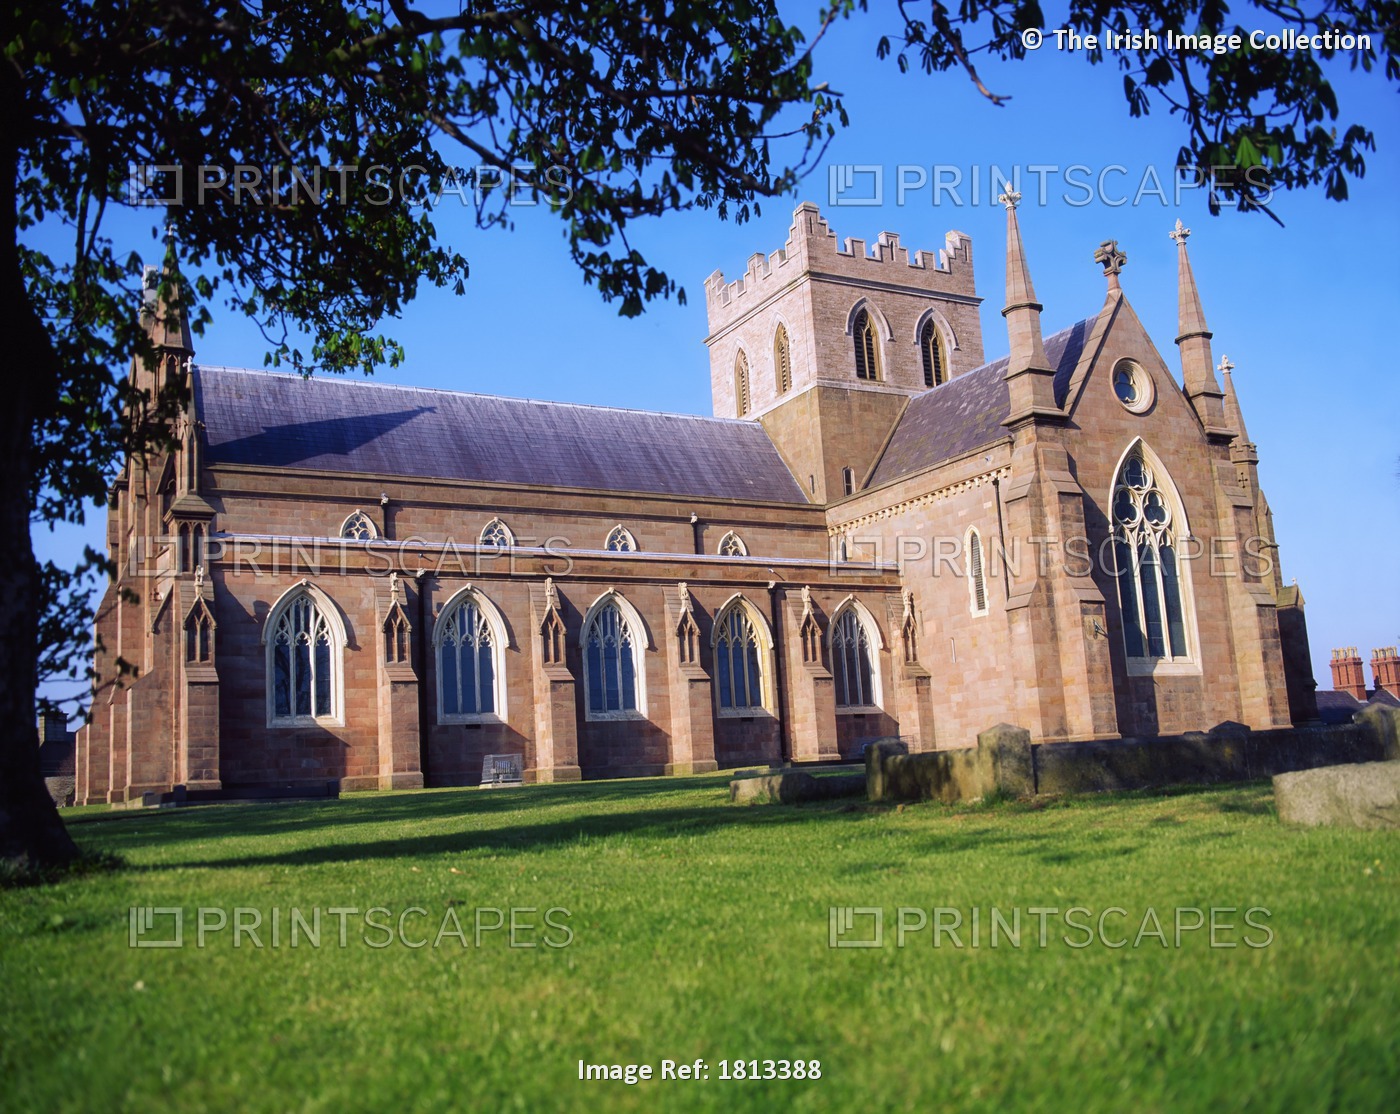 St Patricks Cathedral, Armagh, Co Armagh, Ireland